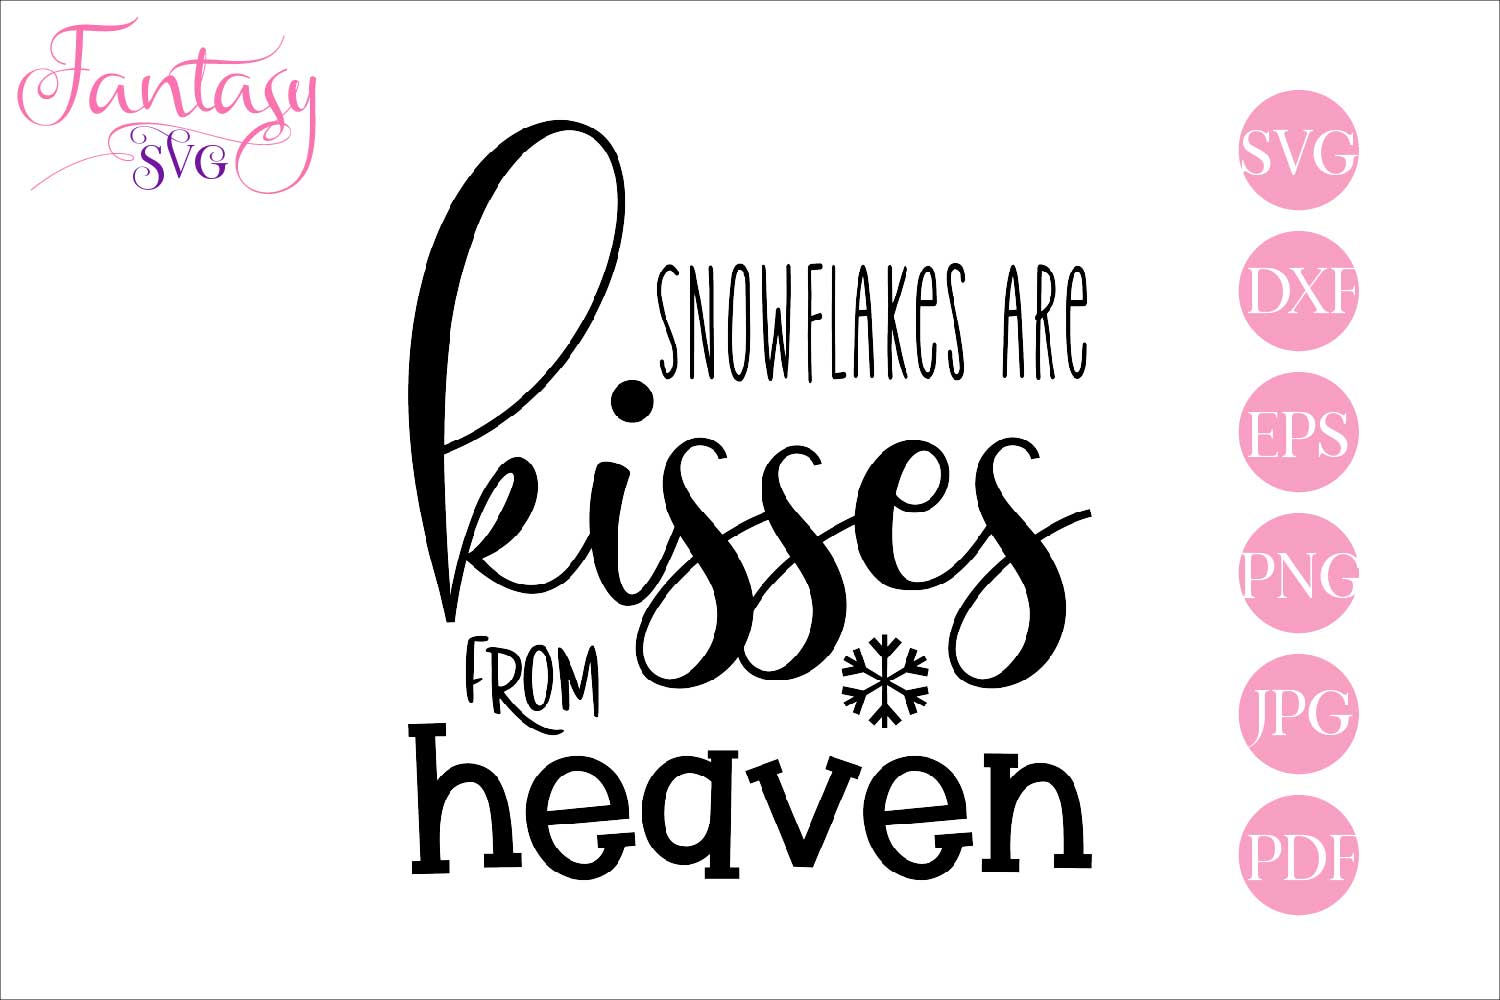 Download Free SVG Snowflakes Are Kisses From Heaven from fbcd.co.